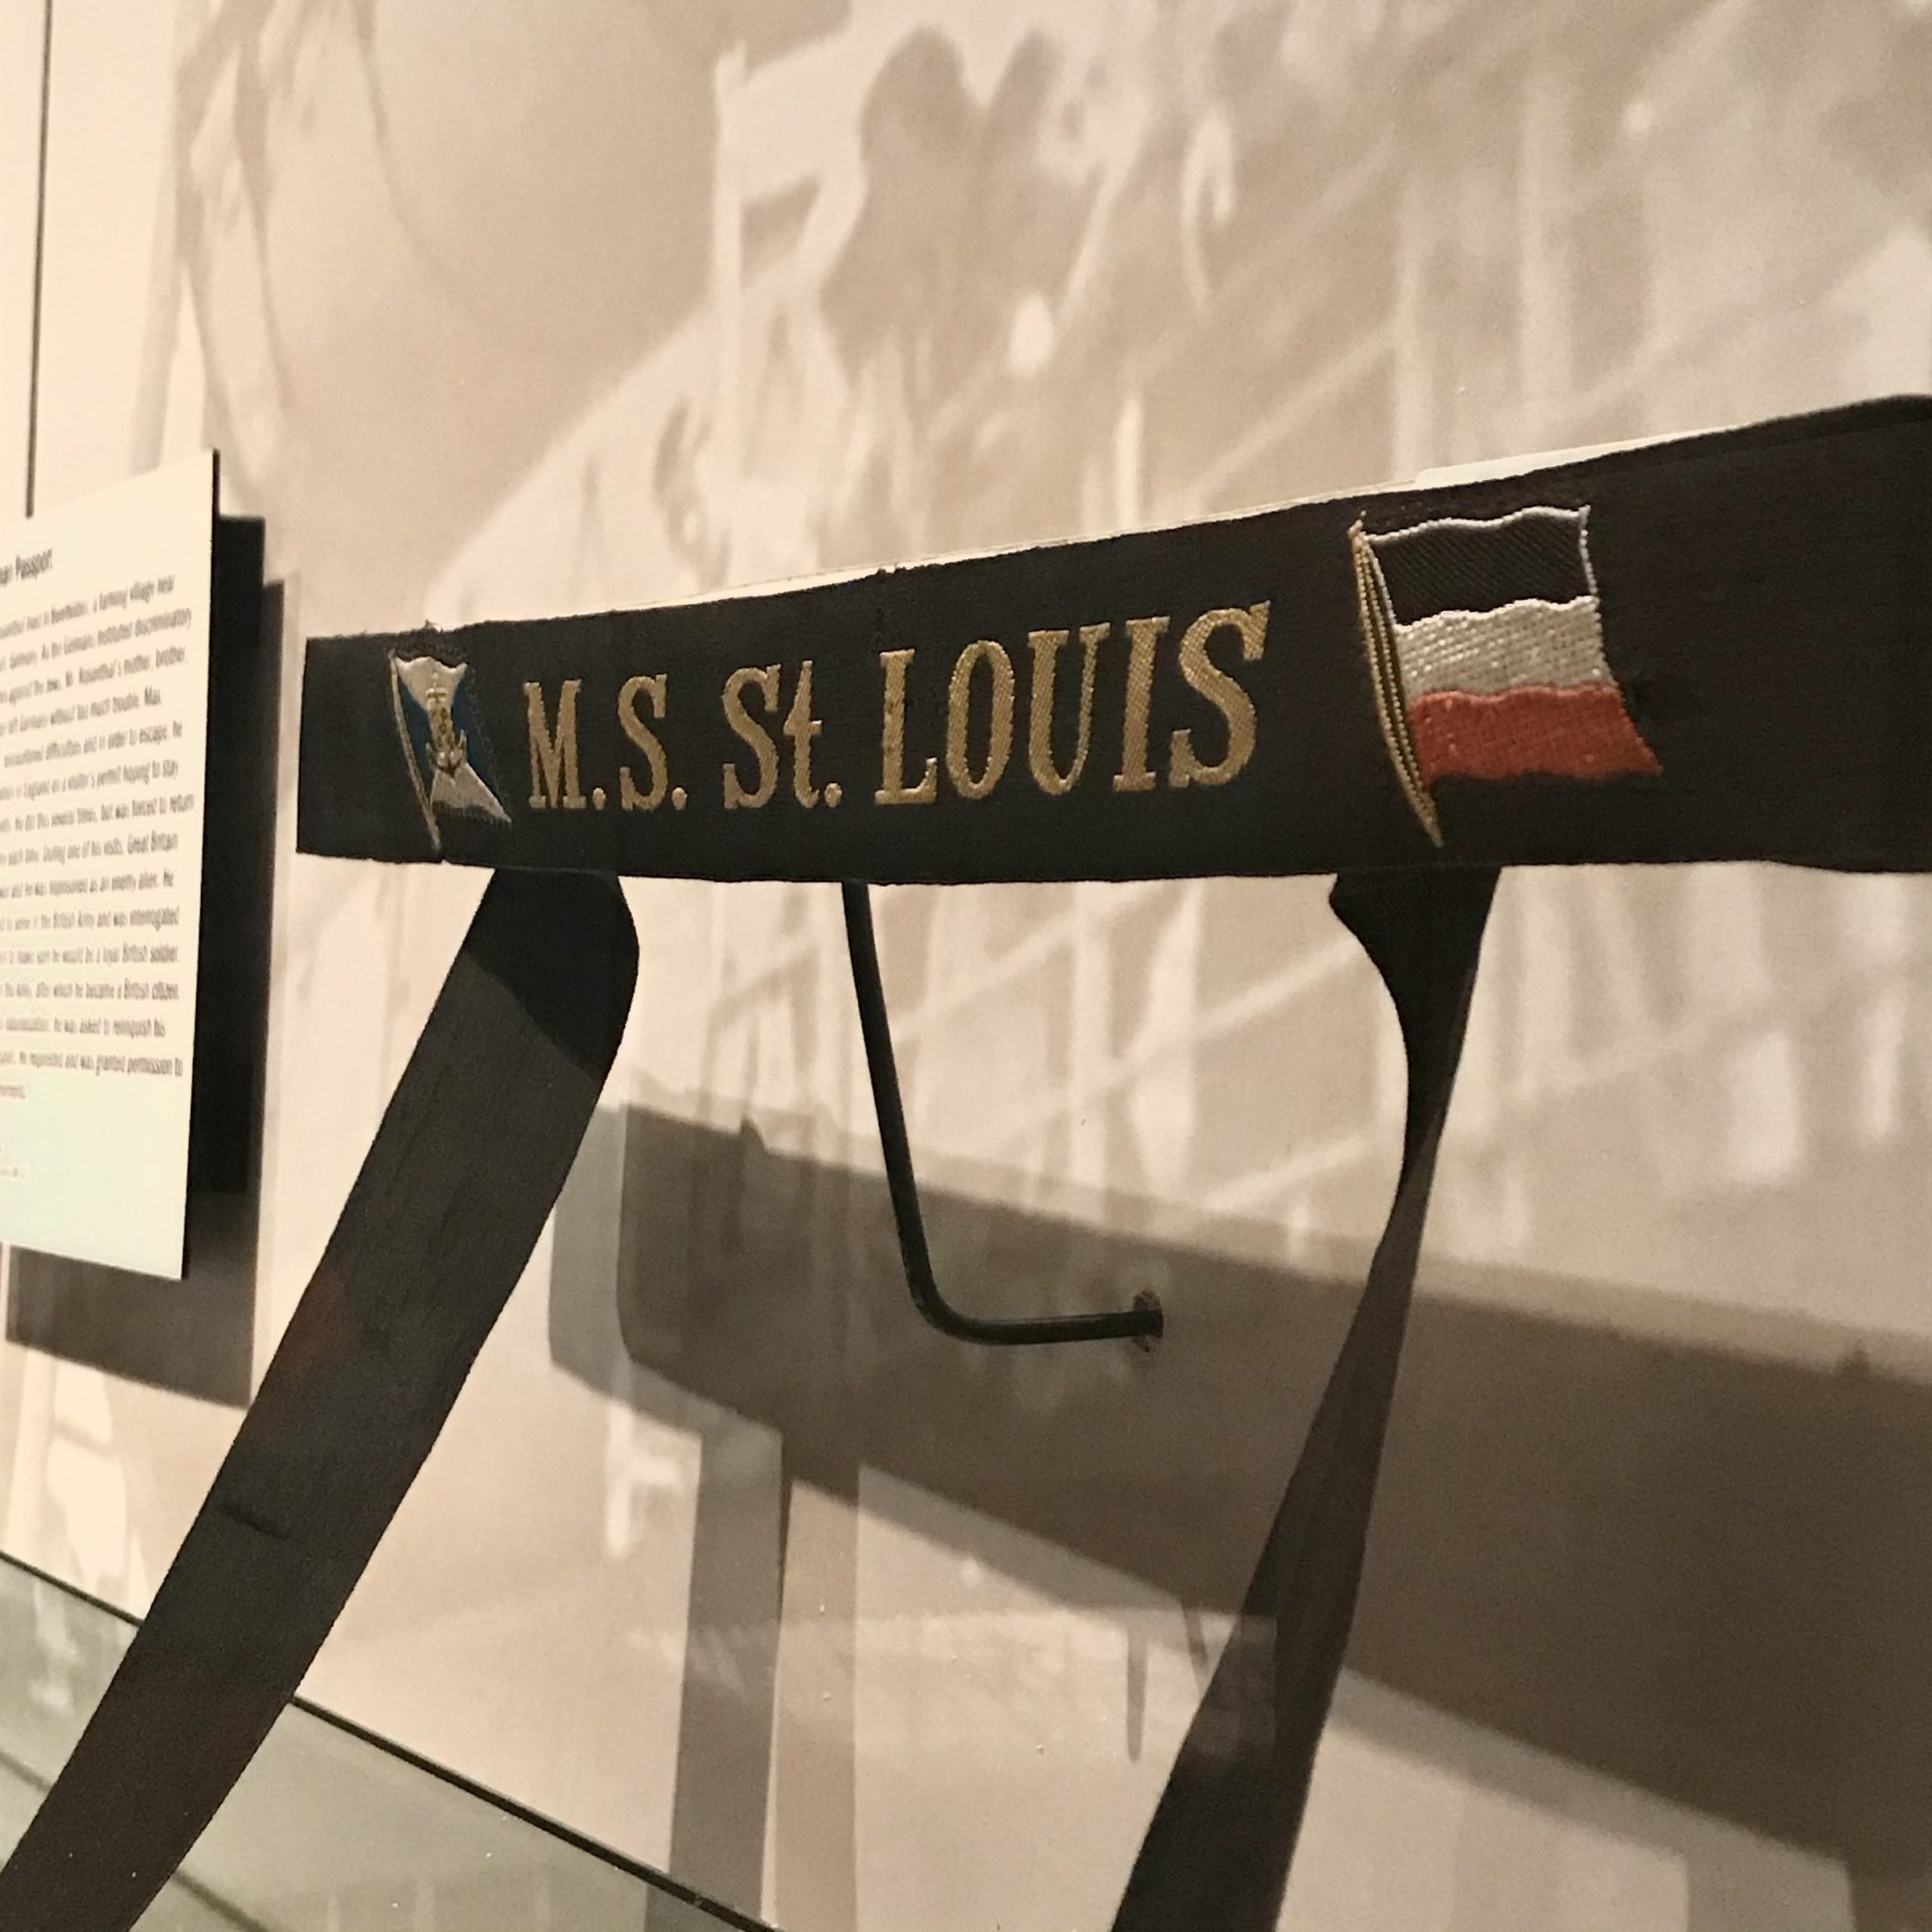 Sailor's Uniform Hatband from the MS St. Louis, on display at the Holocaust Memorial Center.